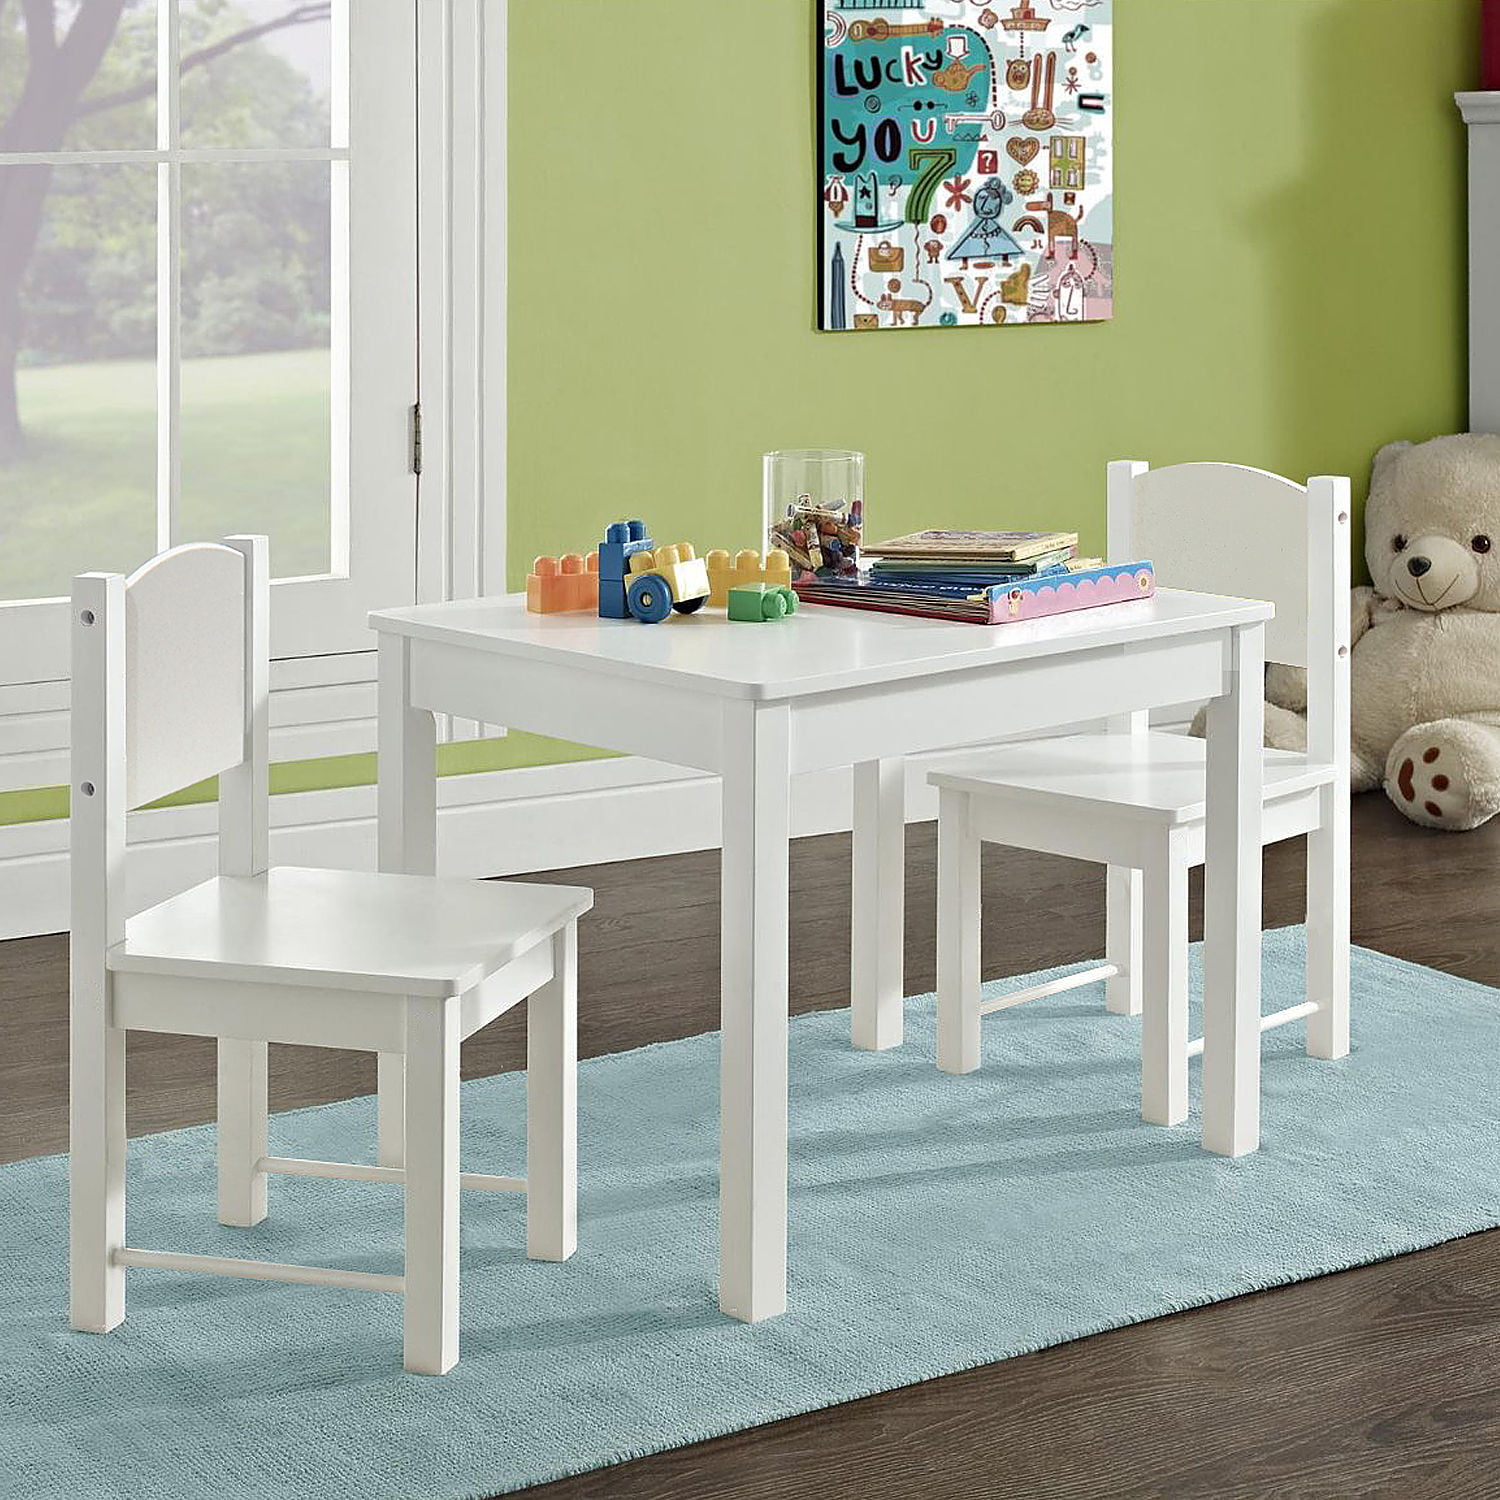 Timy Kids Table and 2 Chairs Set, Solid Hard Wood, White - Walmart.com